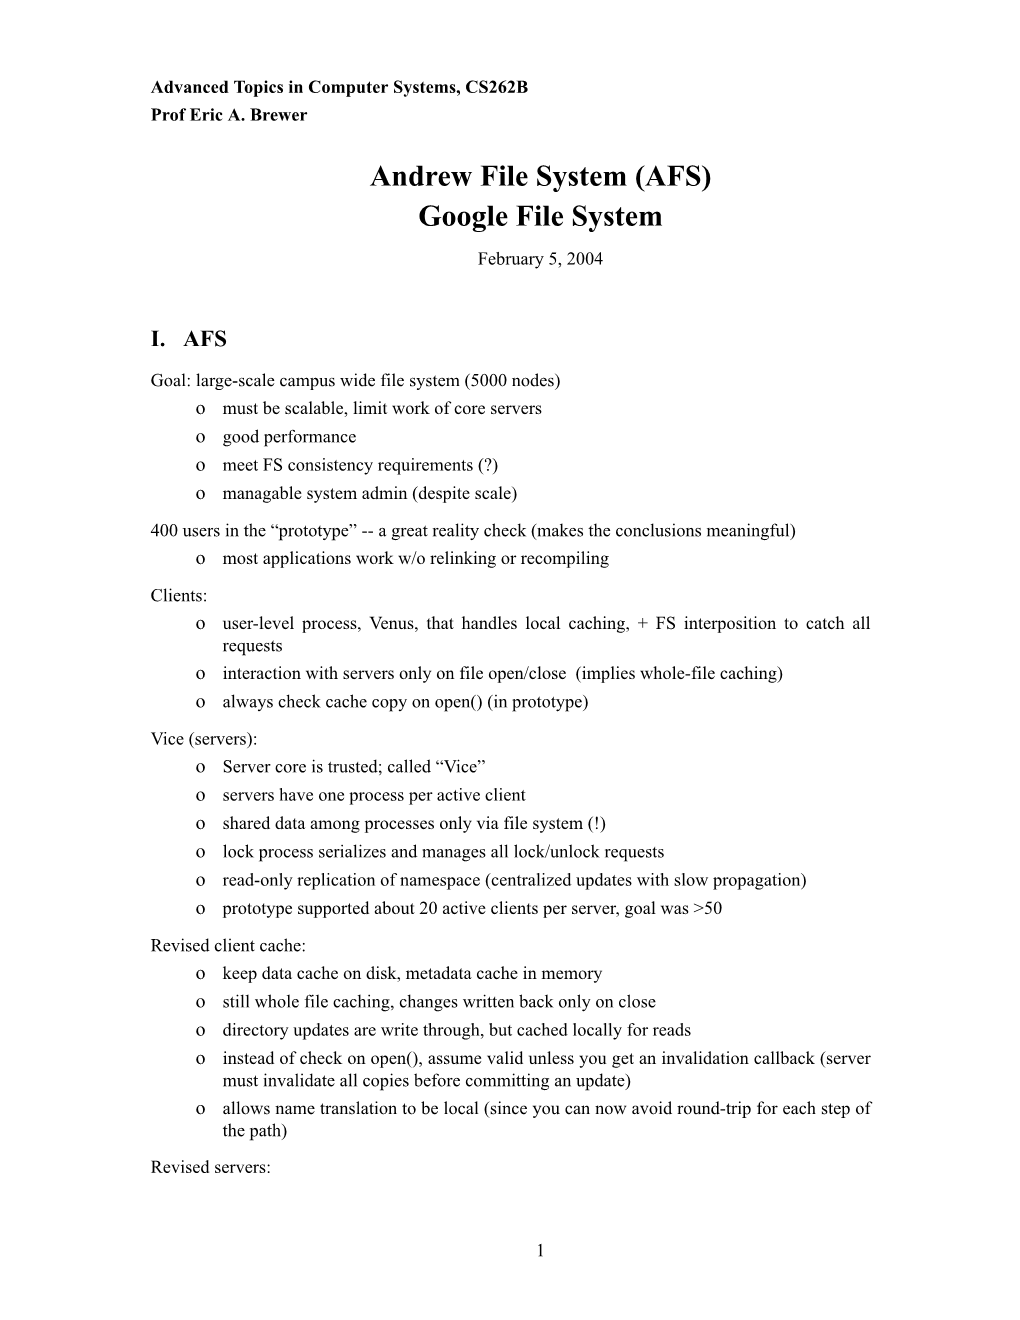 Andrew File System (AFS) Google File System February 5, 2004